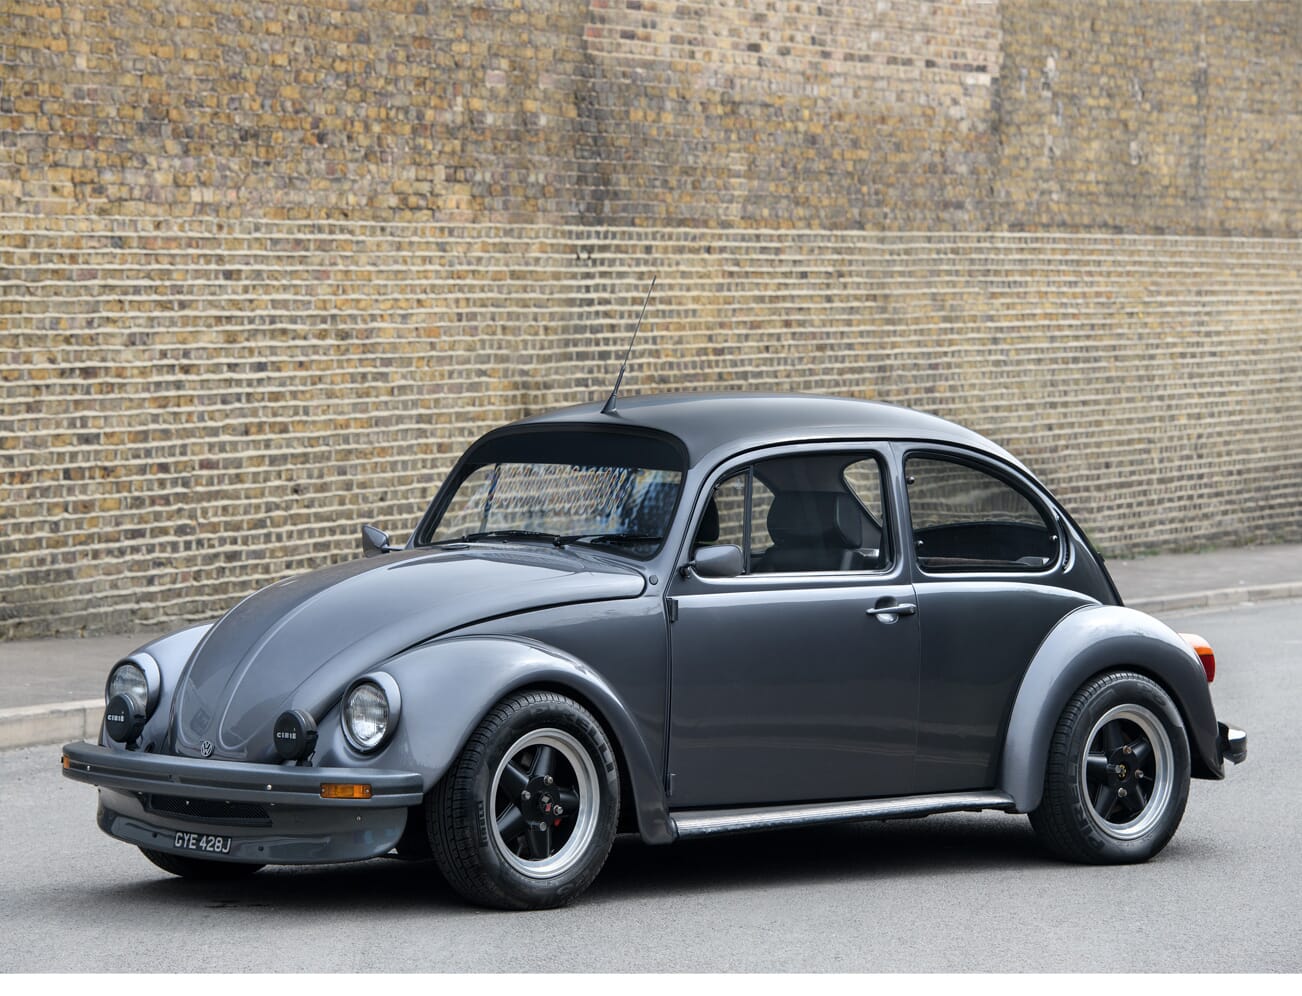 Introduce 60+ images is the volkswagen beetle a good car - In ...